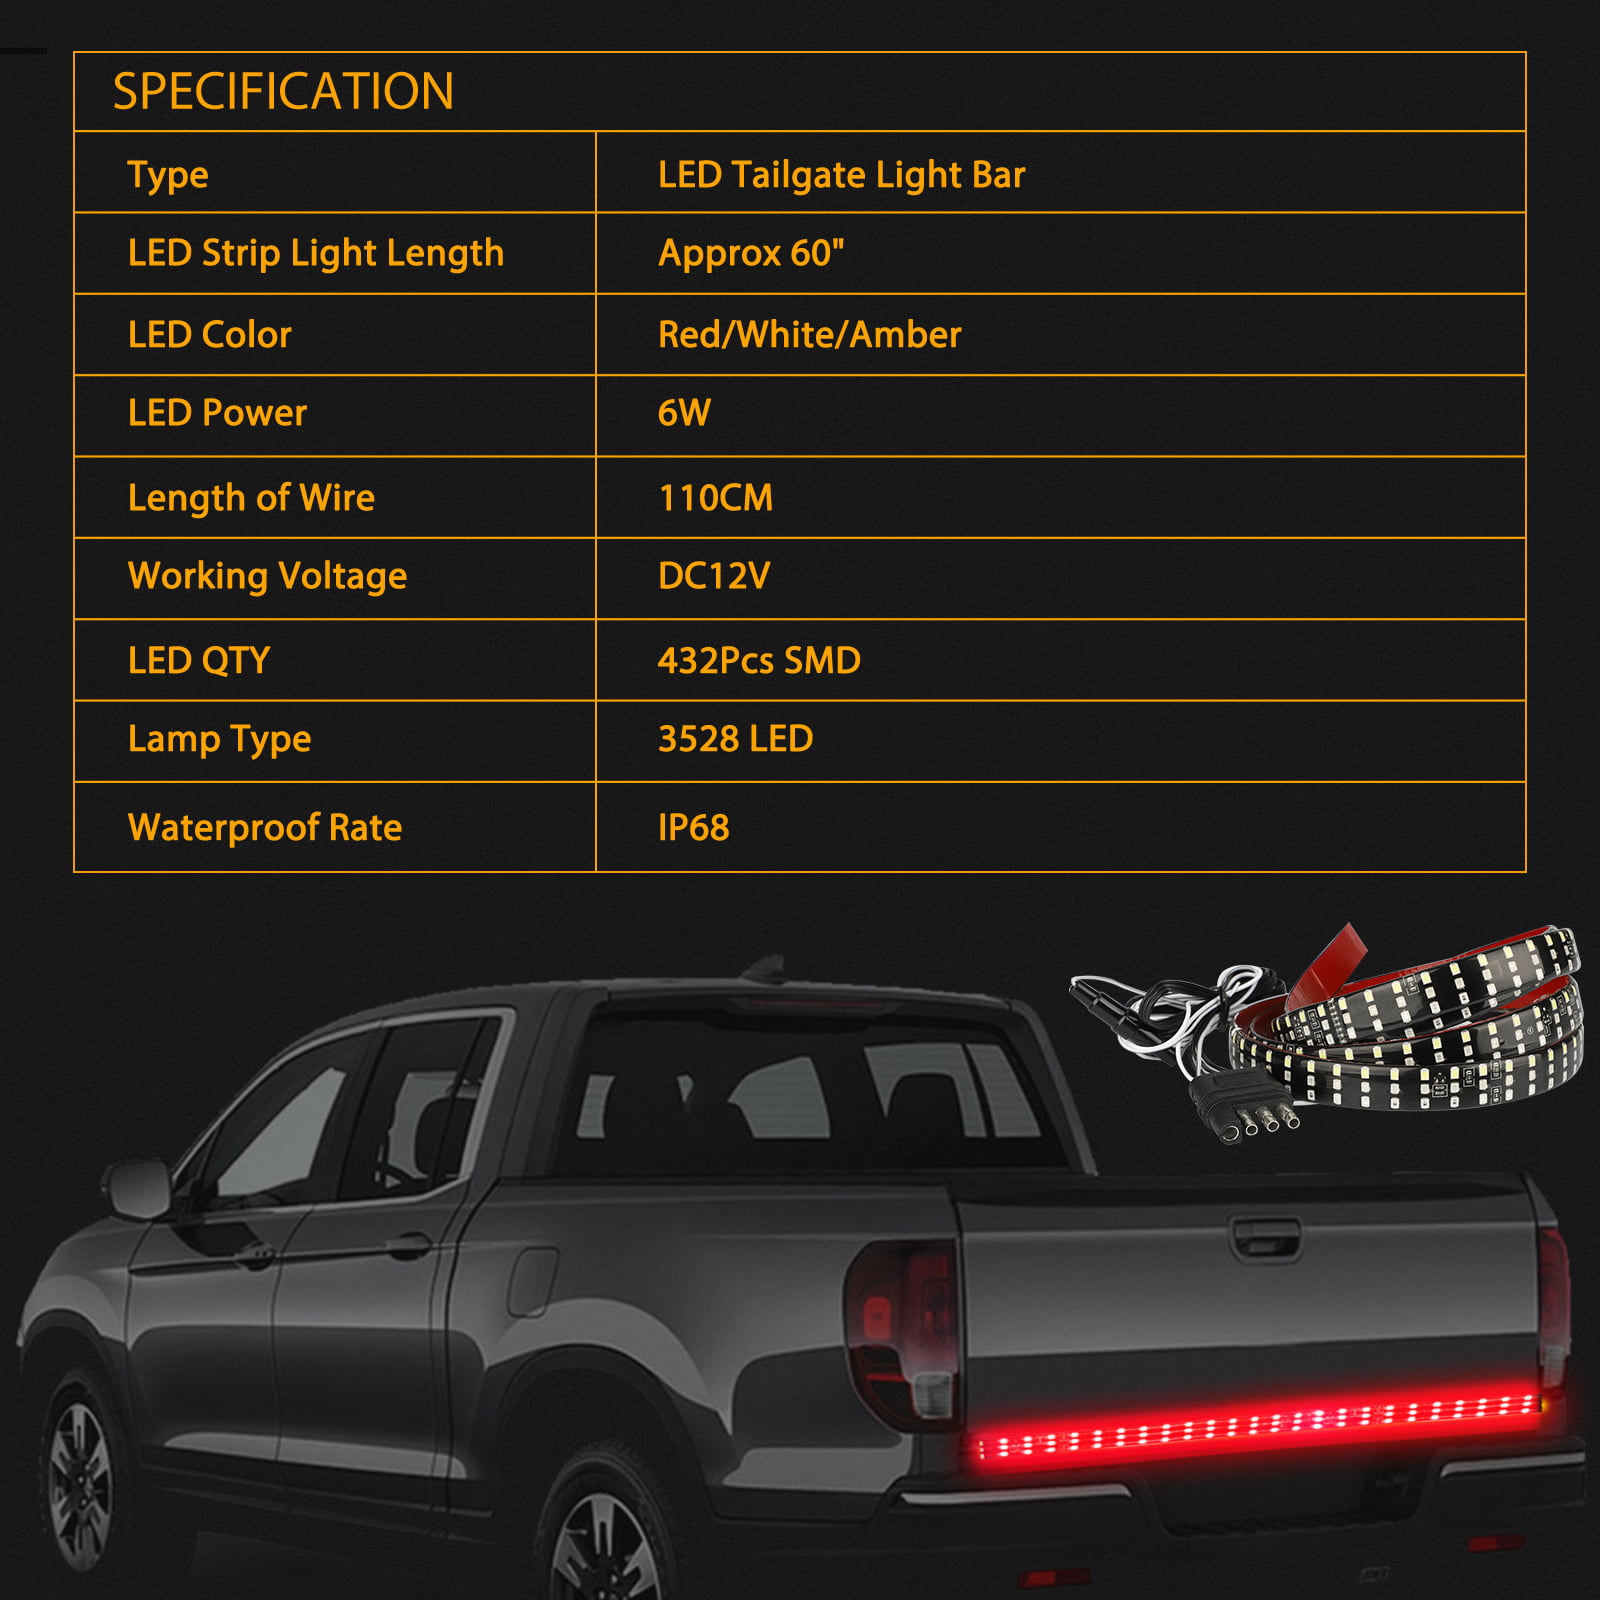 Kingshowstar New 60 Auto Tailgate LED Light Bar Red Yellow White Reverse Stop Running Brake Turn Signal Lightwith 60pcs Red 60pcYellow &30pcs White LED,2 Year Limited Warranty 